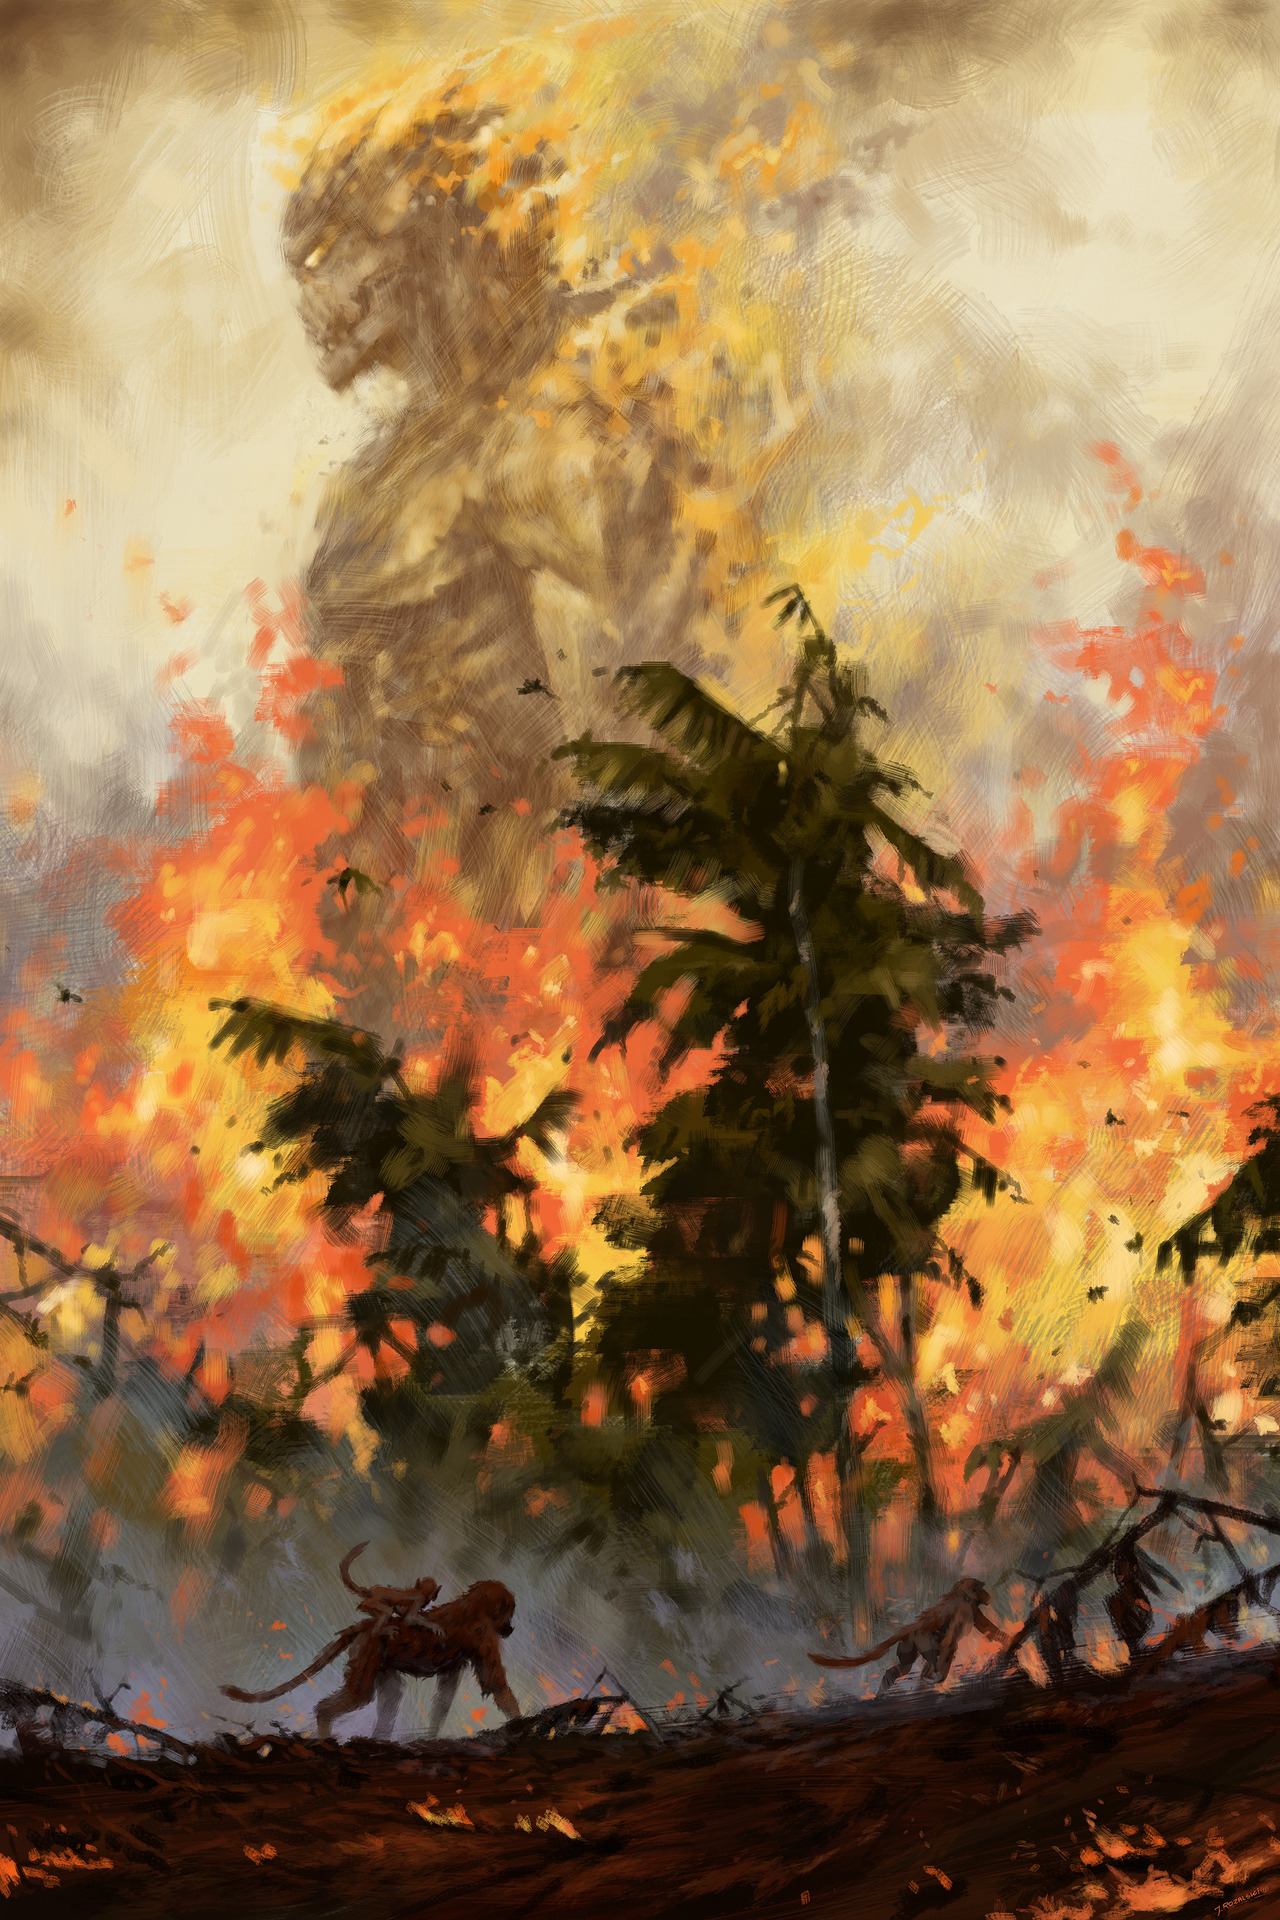 jakubrozalski:  “ The fire demon of the rainforests  “As you know, I rarely refer